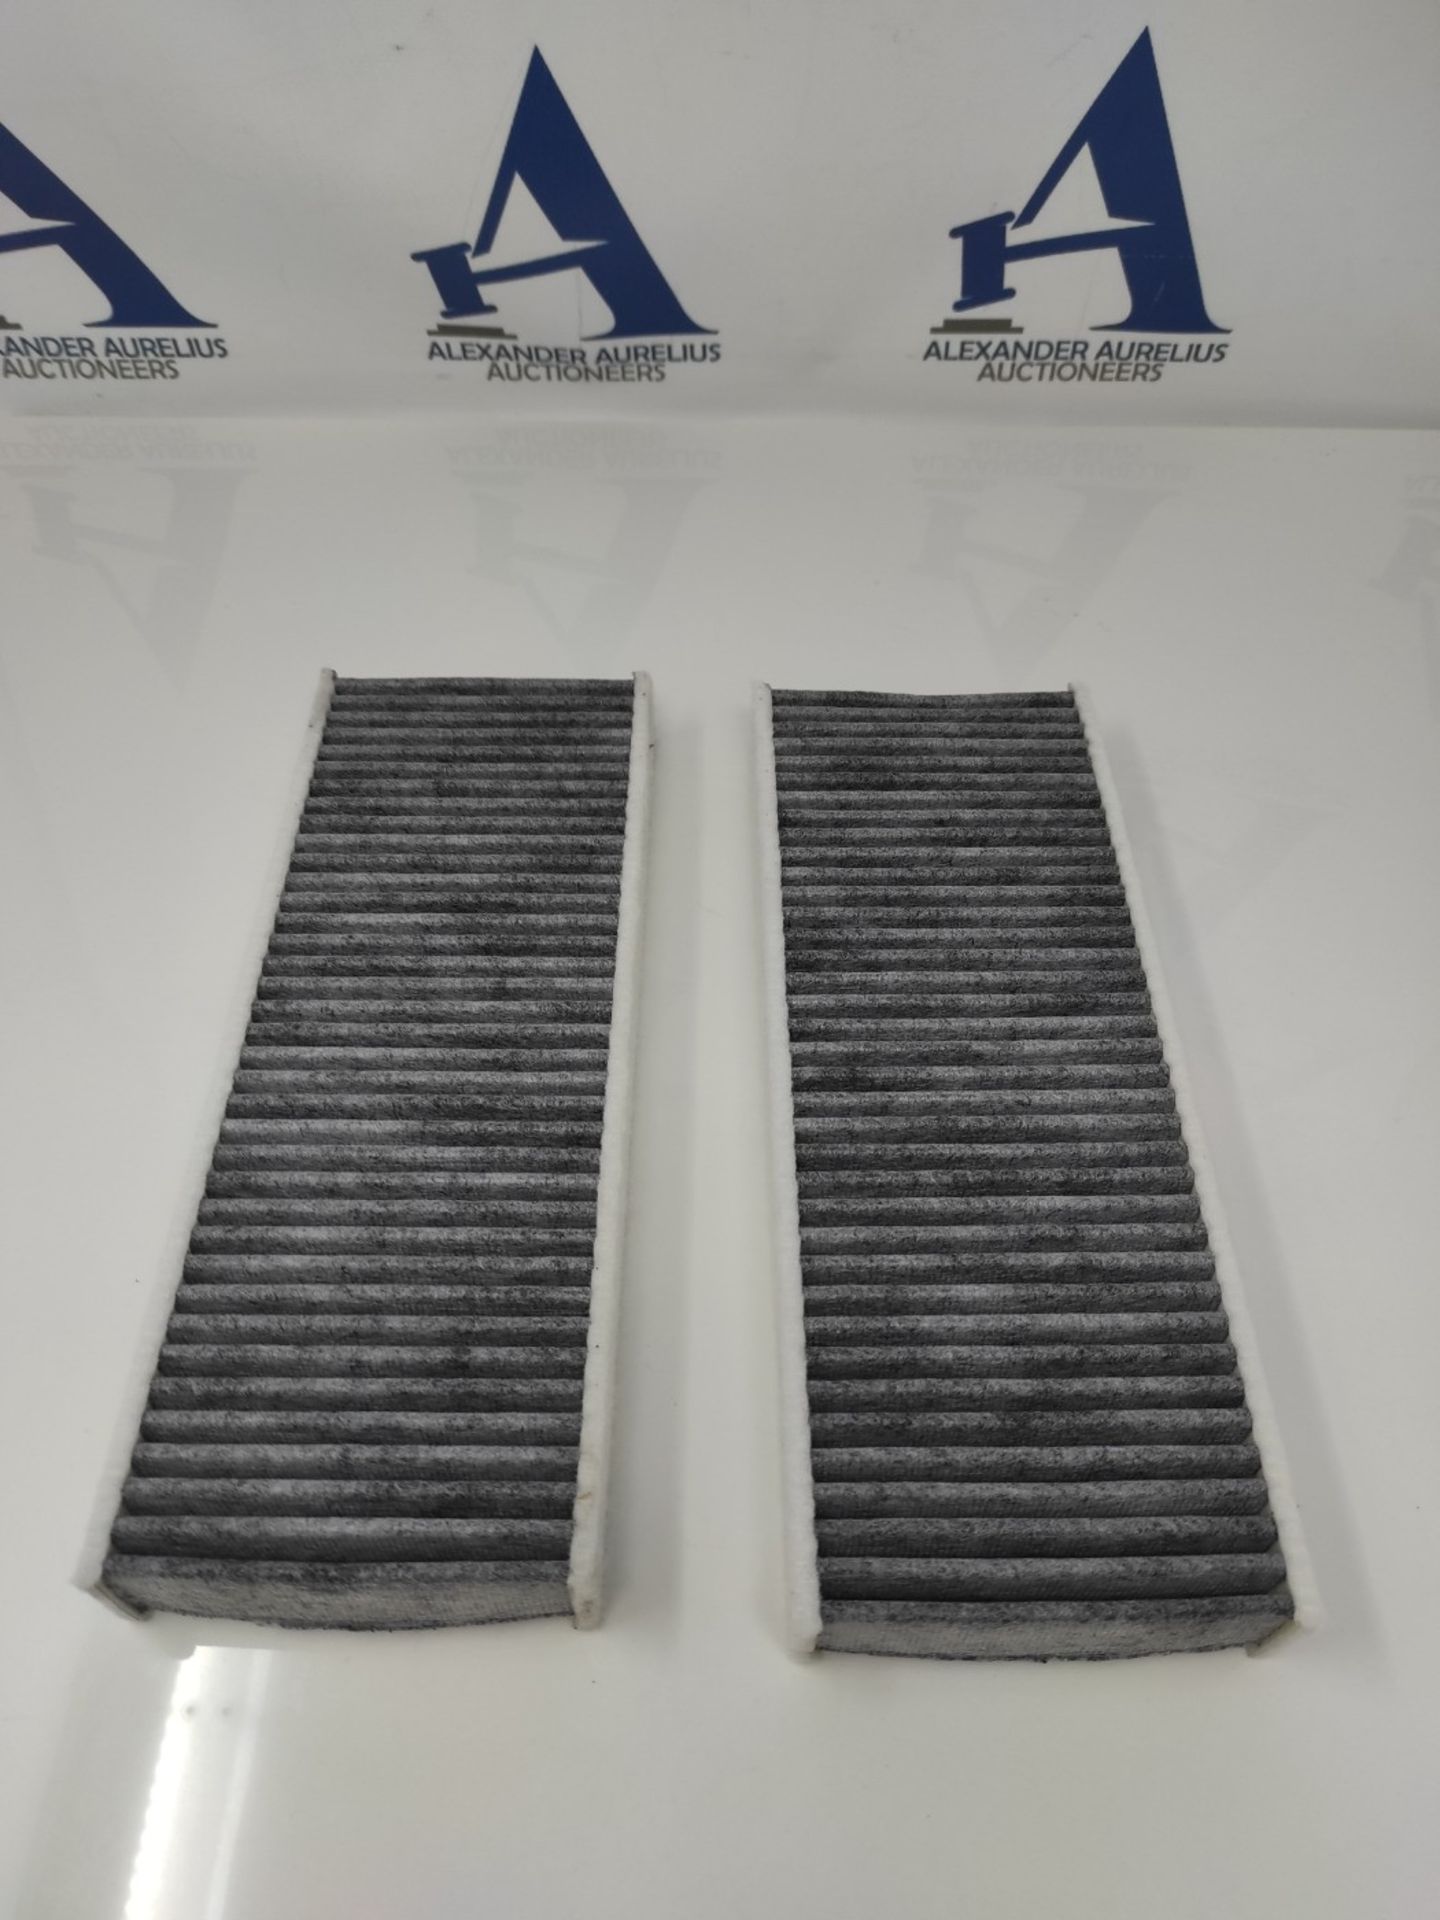 Bosch R5525 - Cabin filter with activated charcoal anti-odour feature - dust and polle - Image 2 of 3